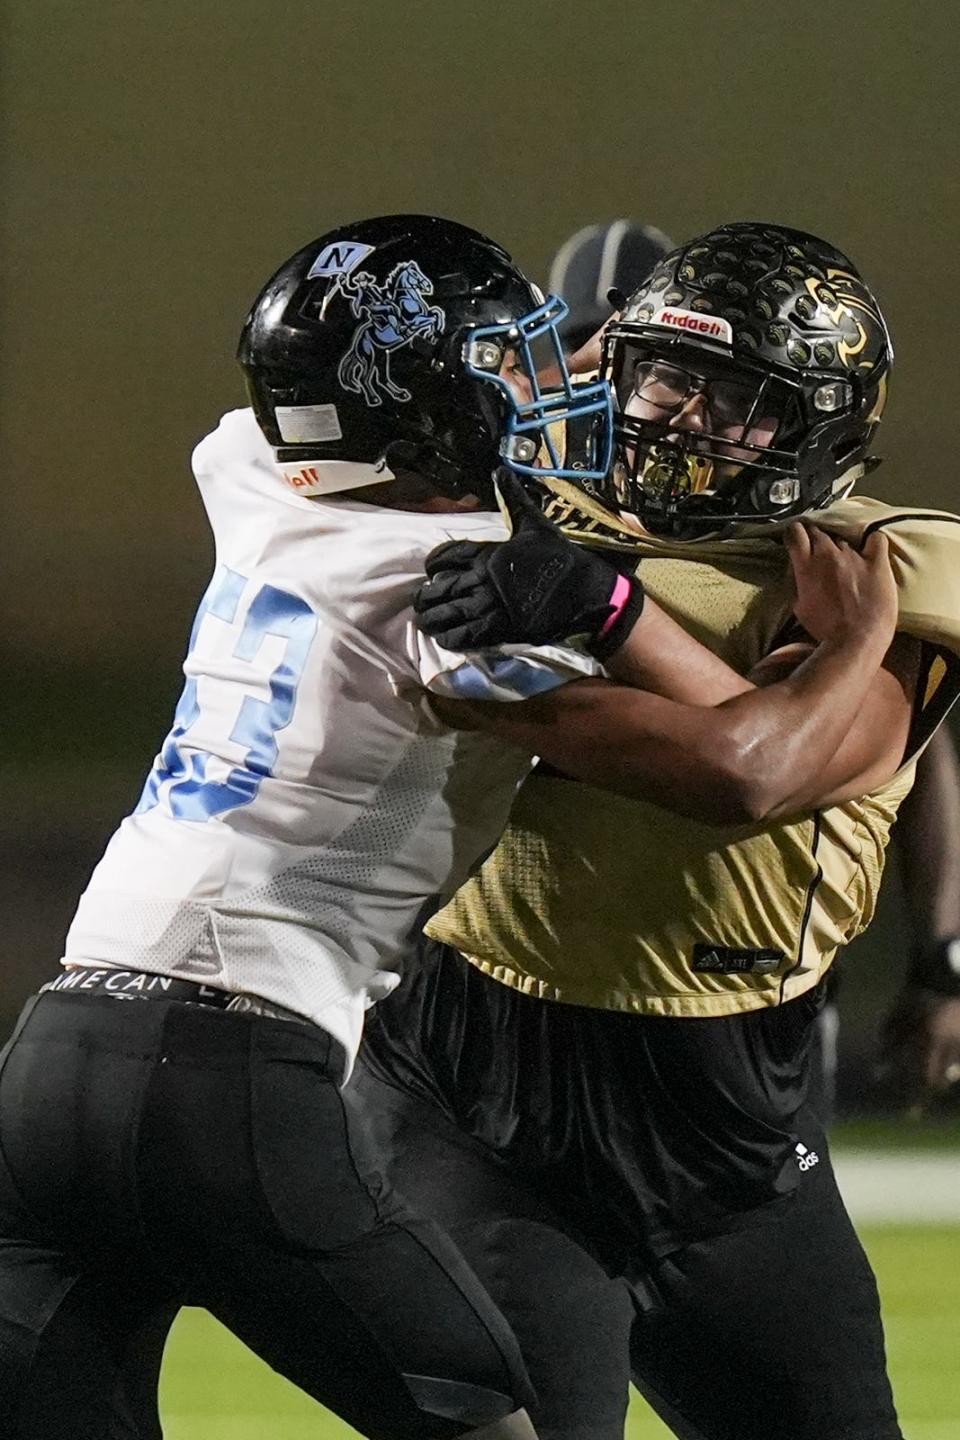 Crockett High School defensive tackle Amado Peña-Gonzalez, right, weighed 425 pounds when he entered high school as a freshman. He is down to 295 as a senior and recently accepted an offer to play football at Southwestern University.